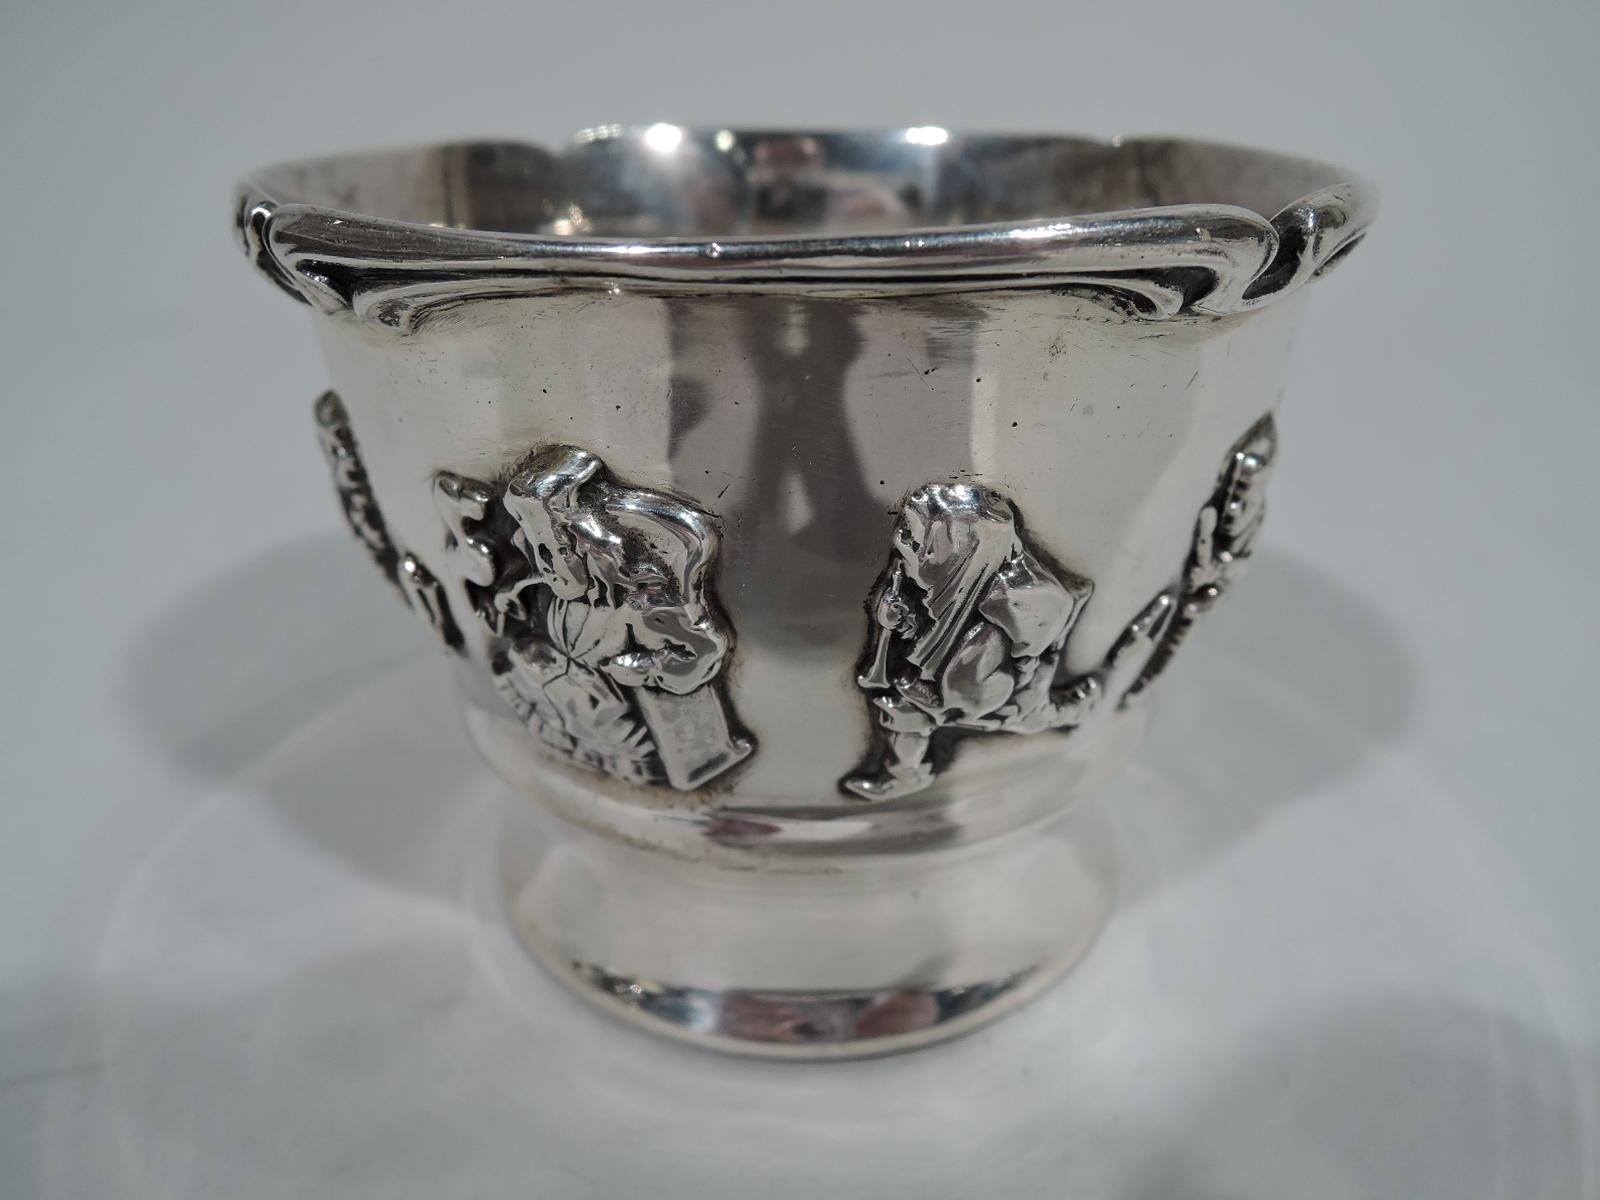 Edwardian sterling silver baby cup with applied allegorical frieze. Made by Gorham in Providence. Concave foot, c-scroll handle, and scrolled whiplash rim. The stages of man, from eager urchin to placid pipe-smoking gent, encircle the body. Fully